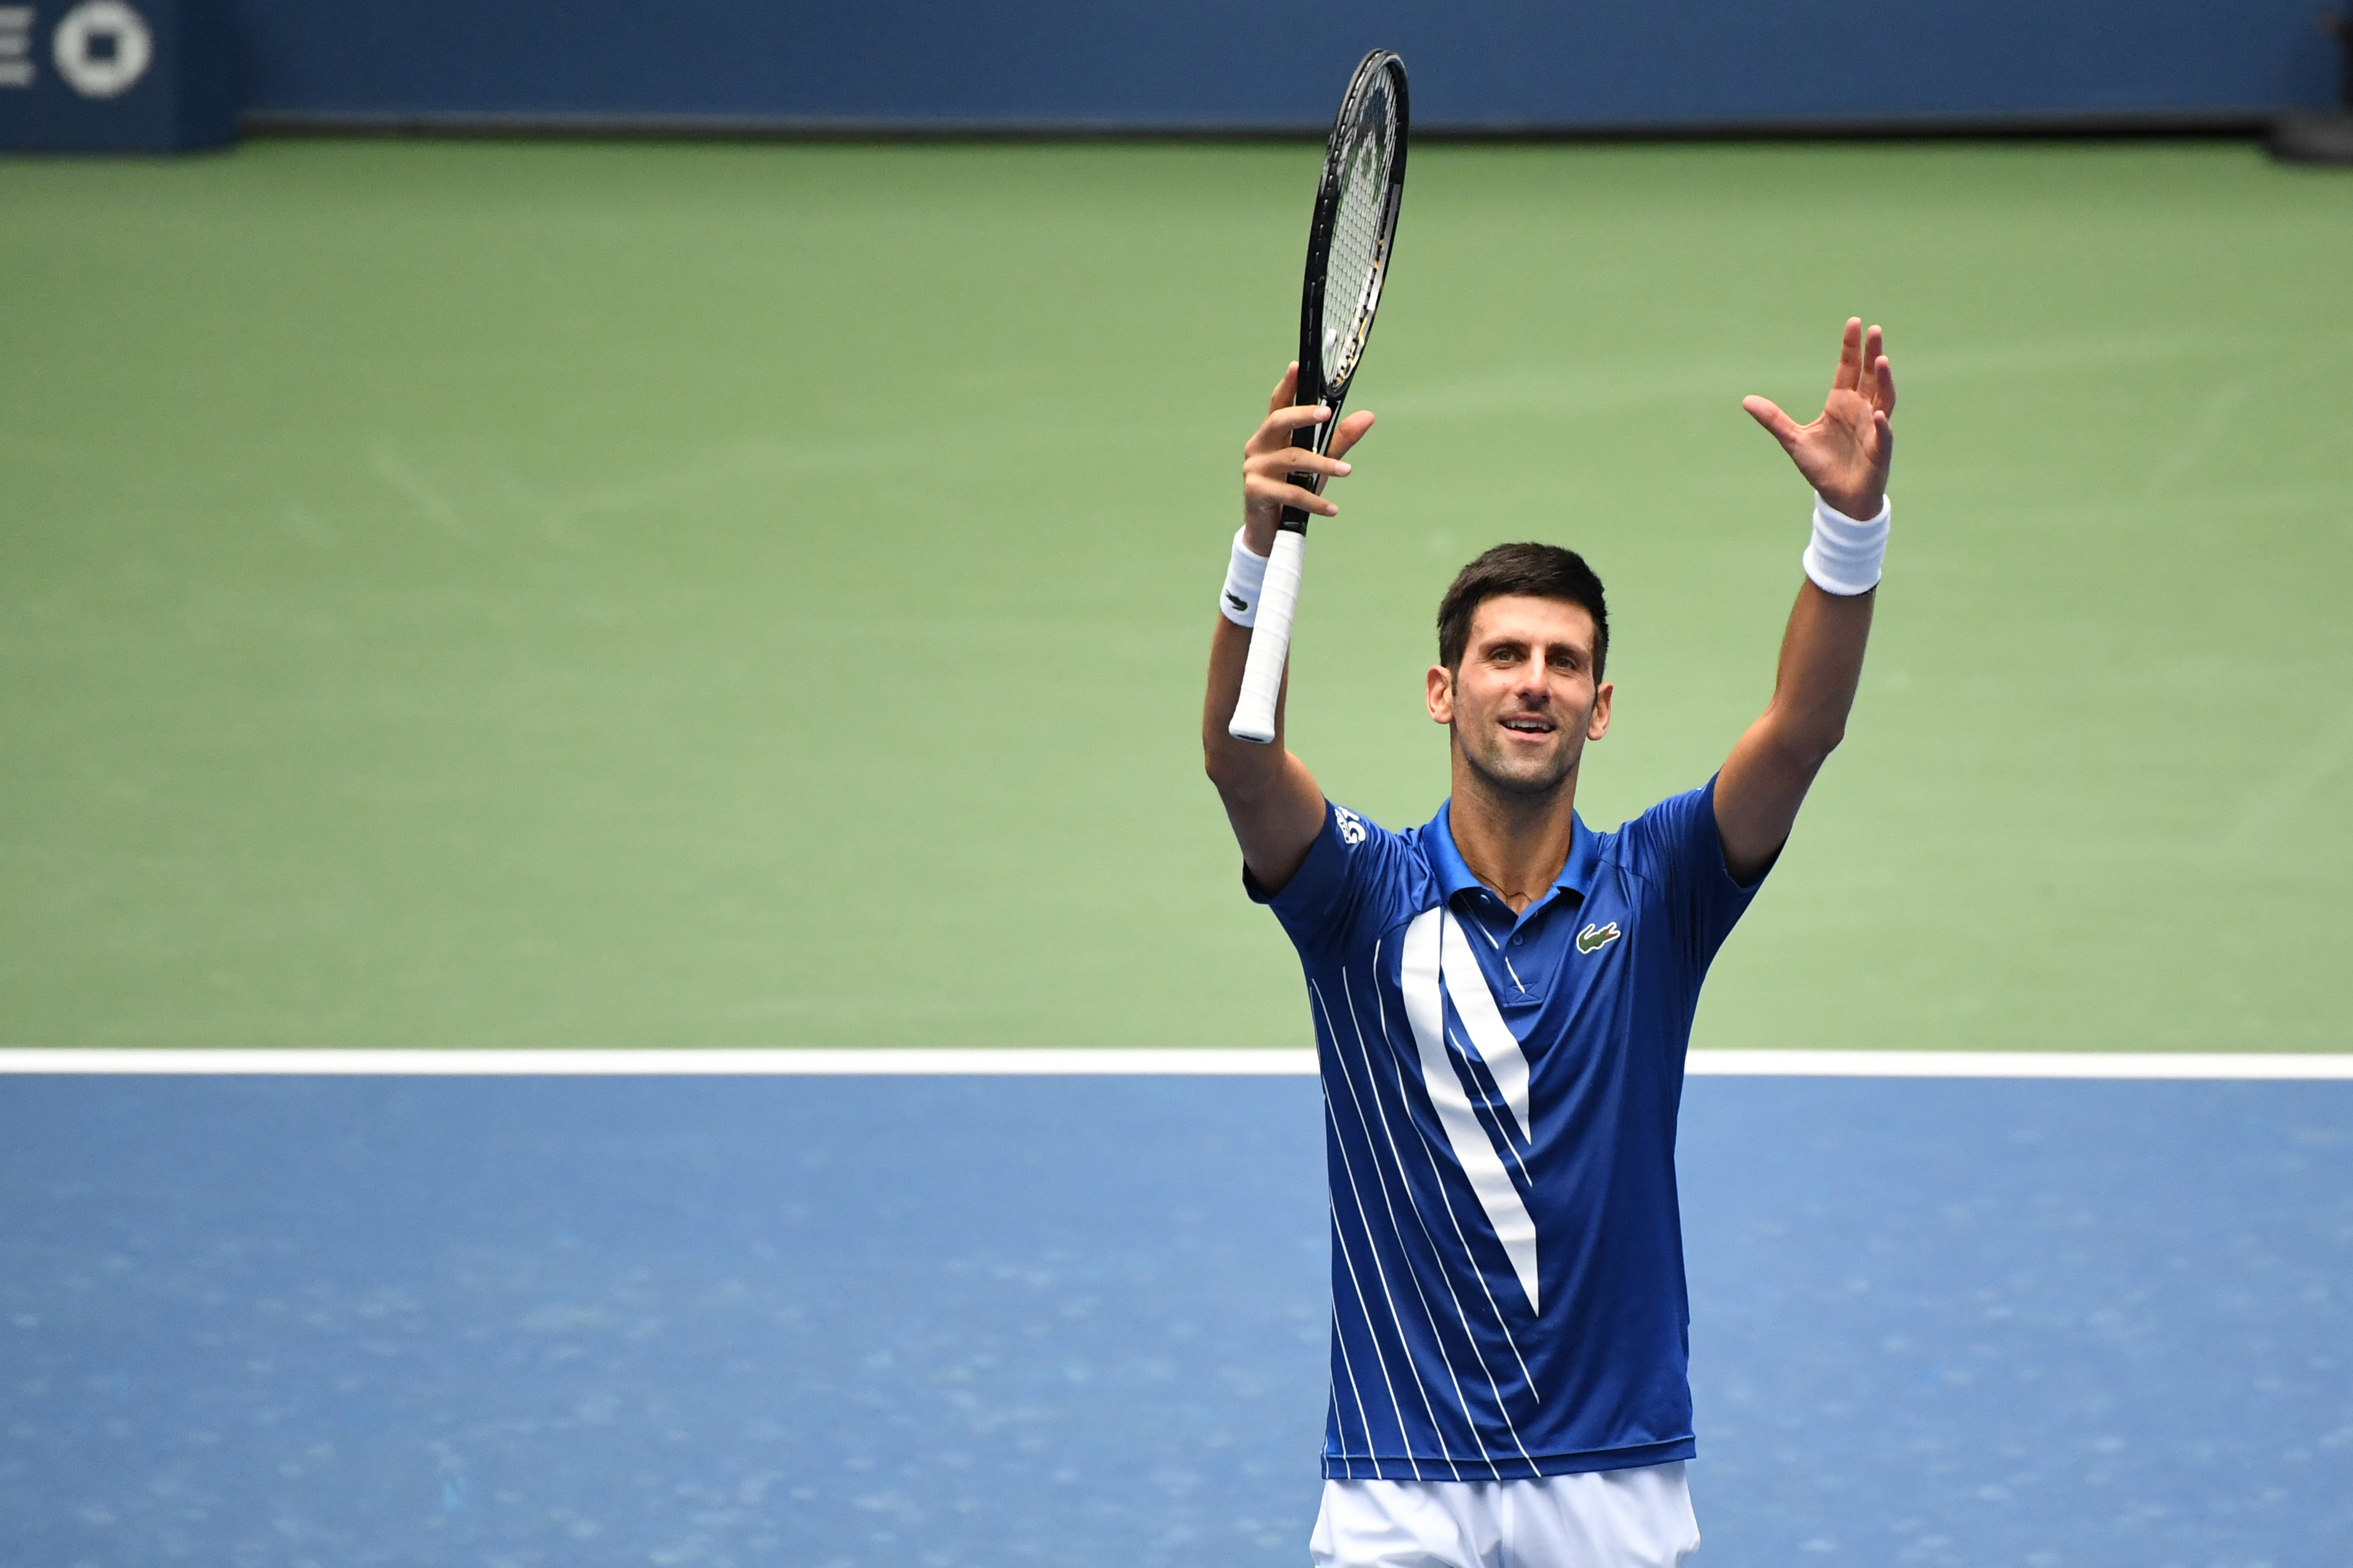 Sep 2, 2020; Flushing Meadows, New York, USA; Novak Djokovic of Serbia celebrates after his match against Kyle Edmund of the United Kingdom (not pictured) on day three of the 2020 U.S. Open tennis tournament at USTA Billie Jean King National Tennis Center. Mandatory Credit: Danielle Parhizkaran-USA TODAY Sports